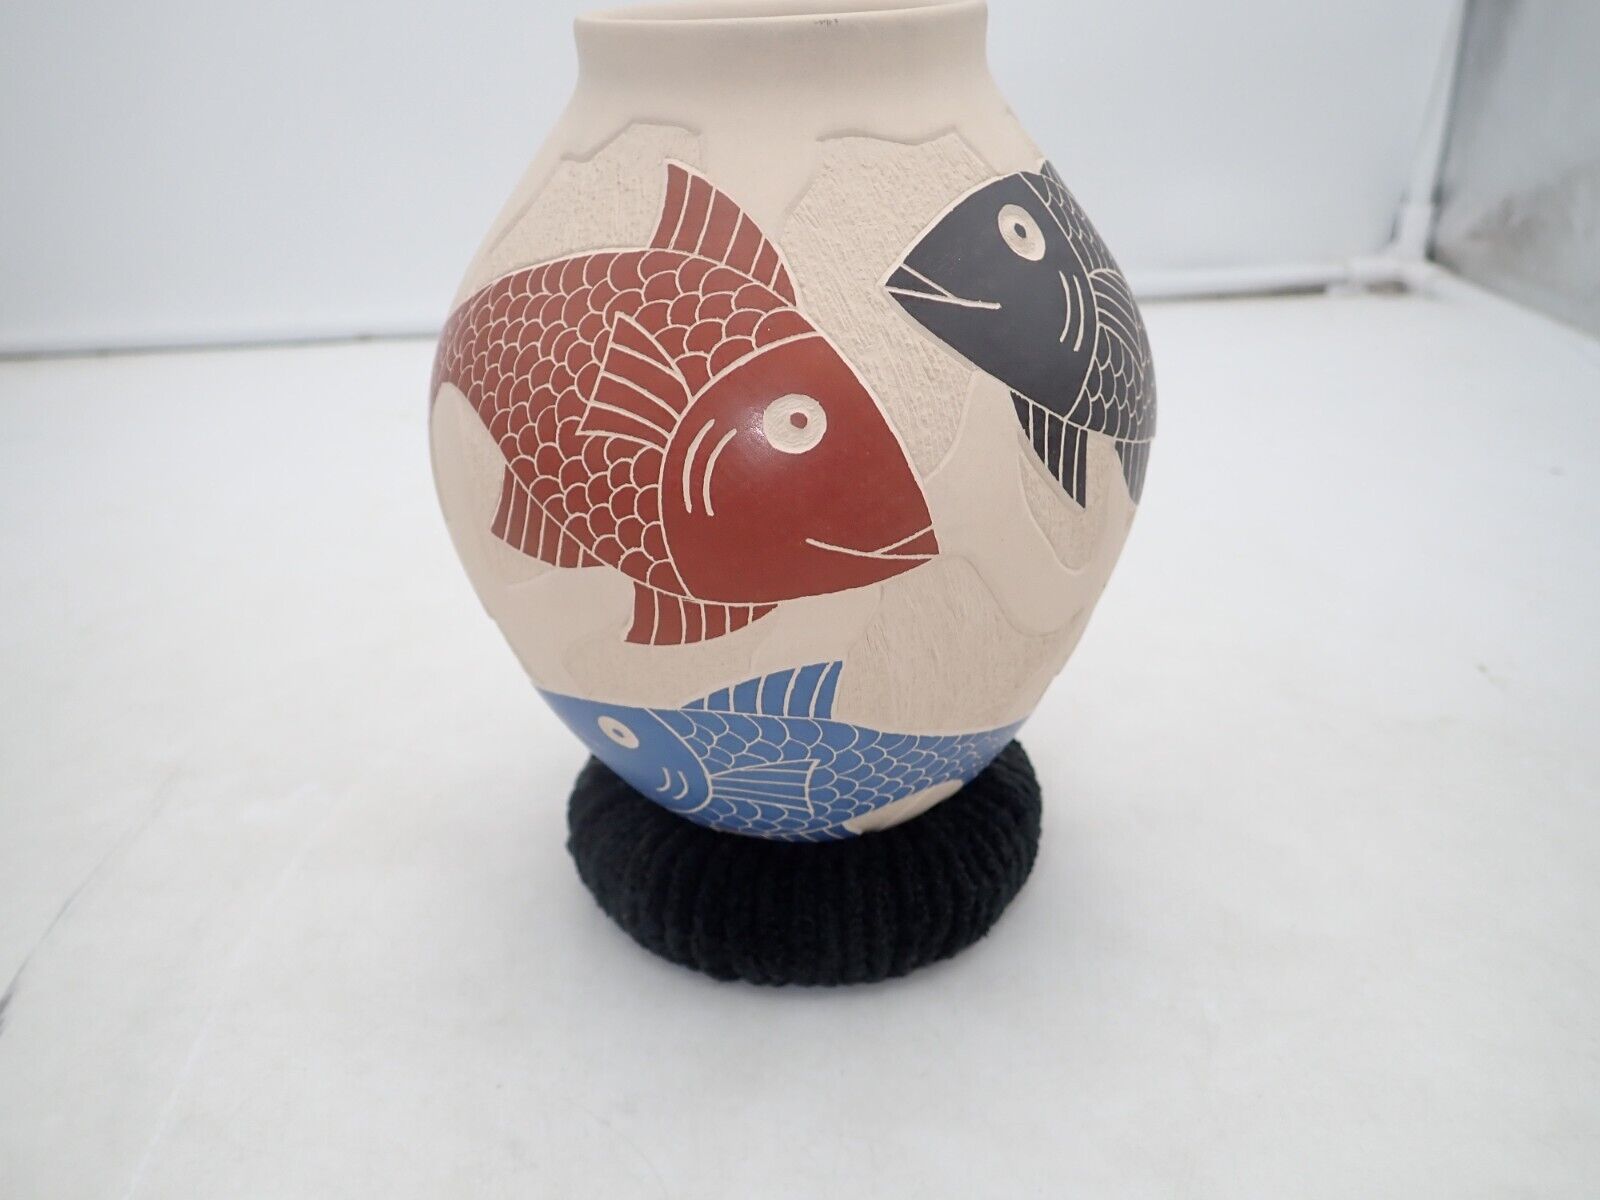 Mata Ortiz Hand built Carved &Painted  Pot or Olla by Humberto Guillen Rodriguez